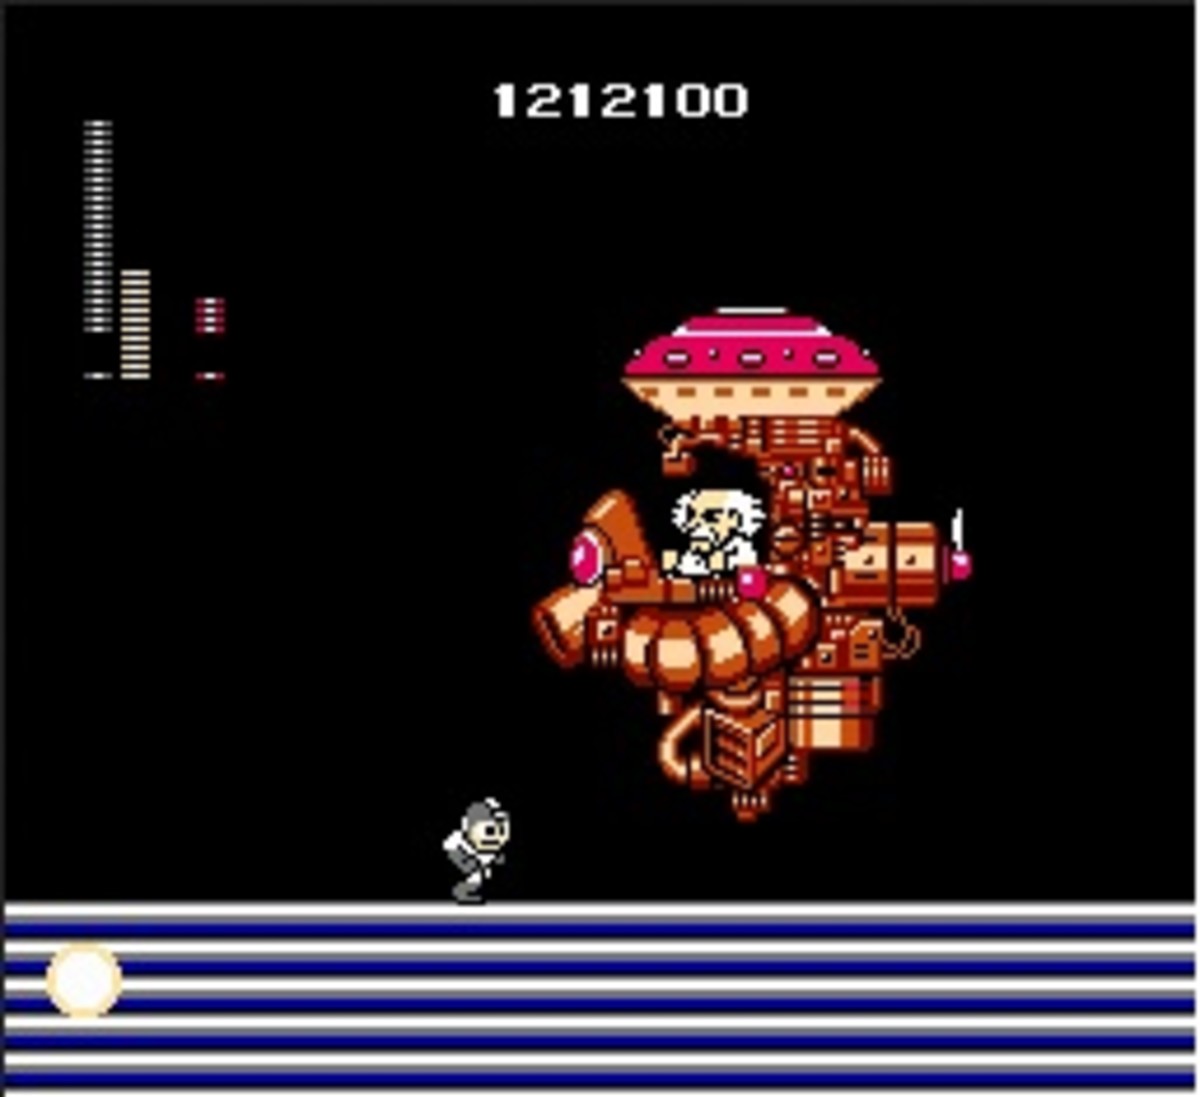 Do you have what it takes to defeat the cunning Dr. Wily?